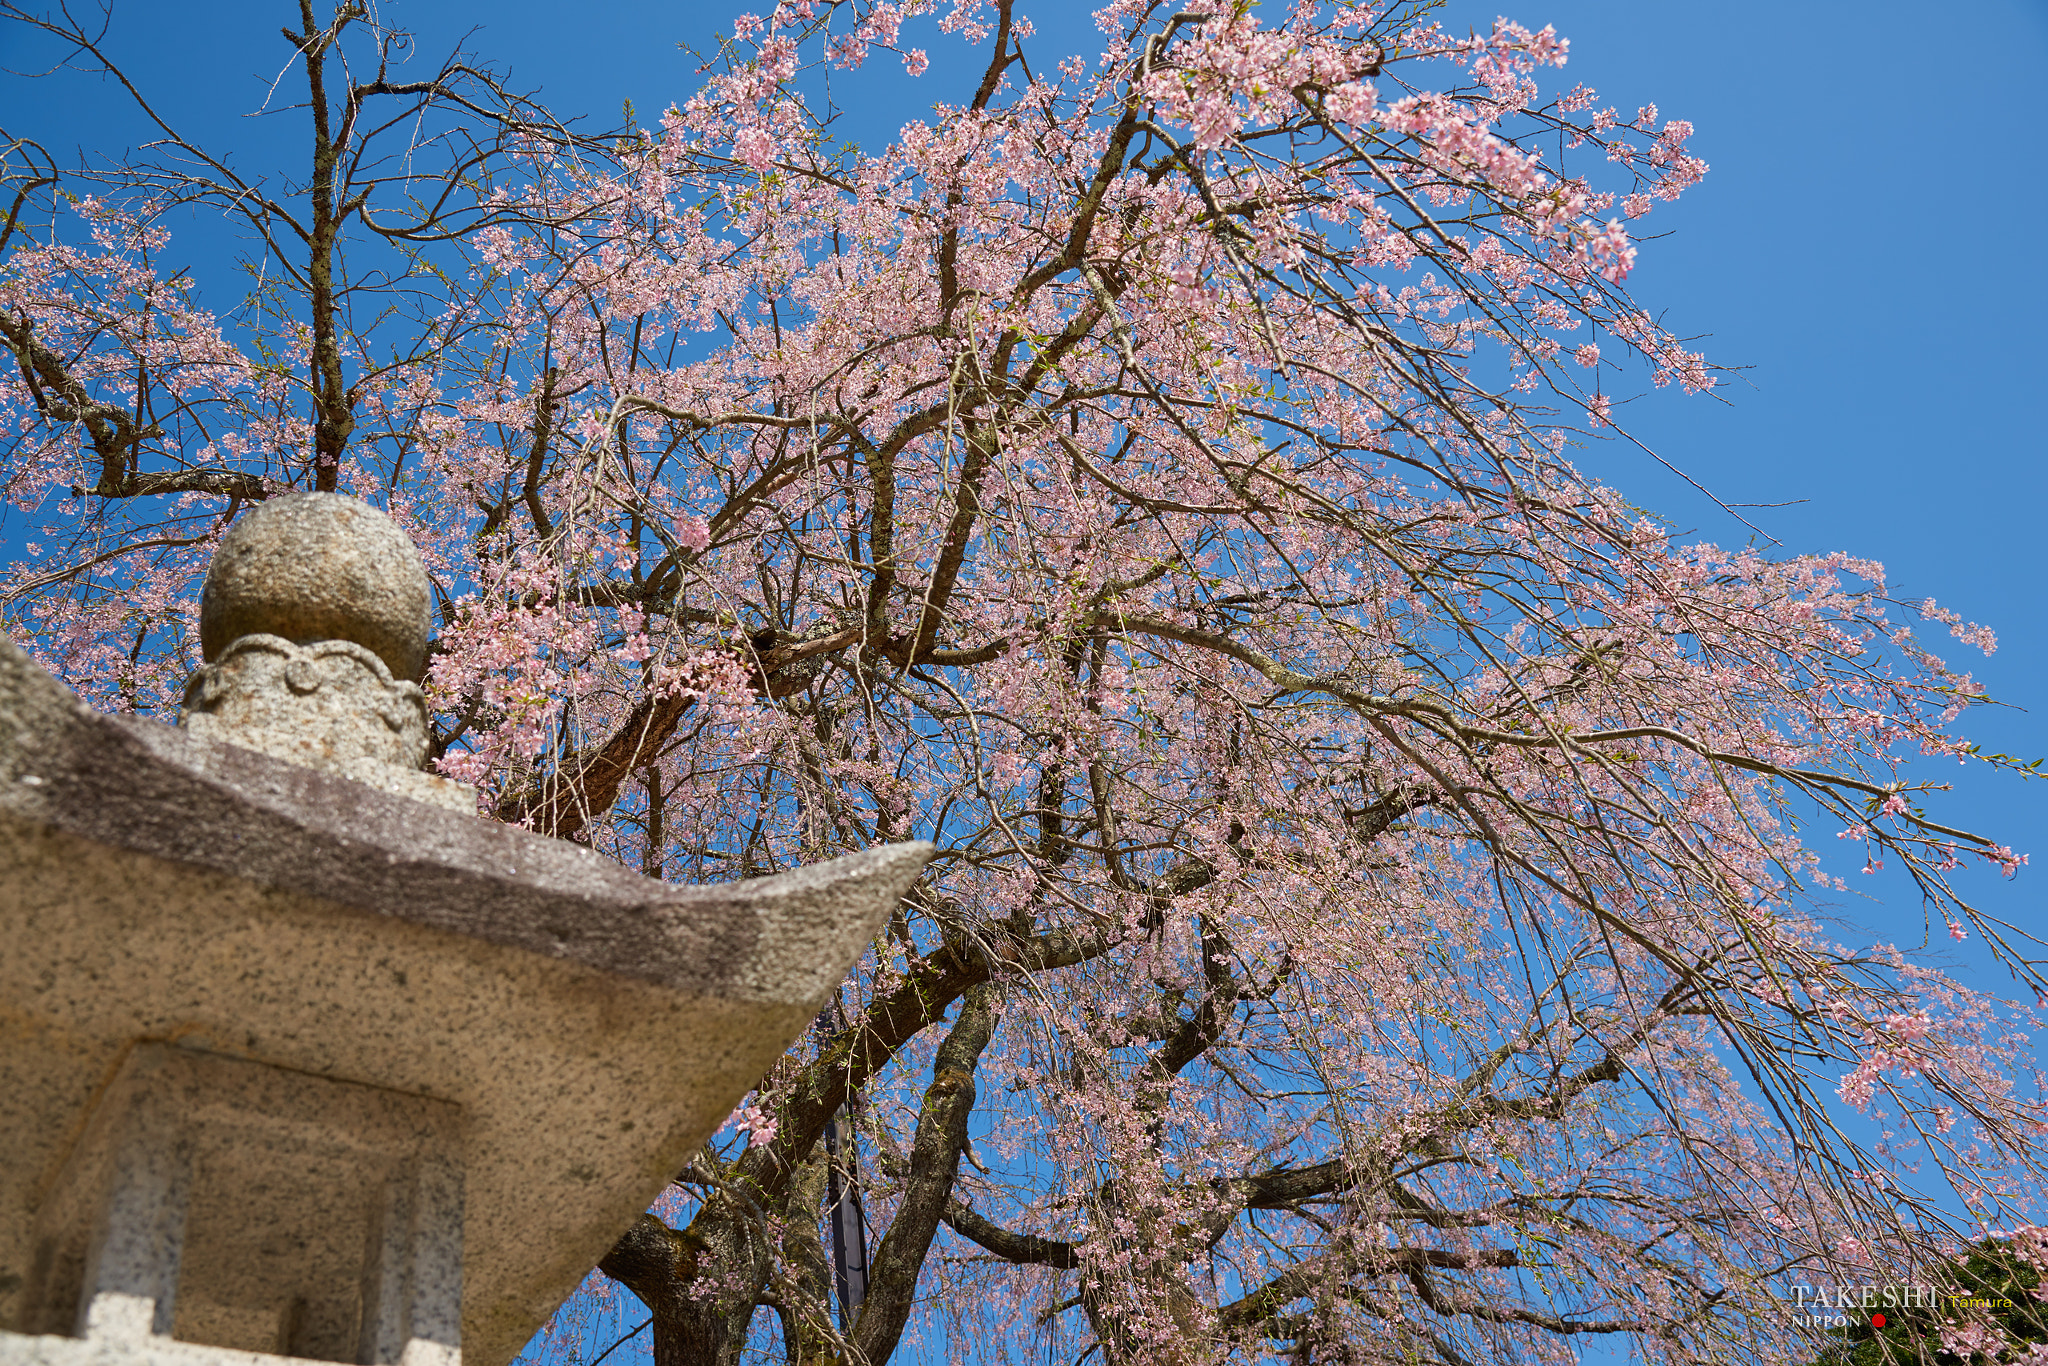 Nikon AF-S Nikkor 24-120mm F4G ED VR sample photo. Stone lantern and weeping cherry photography